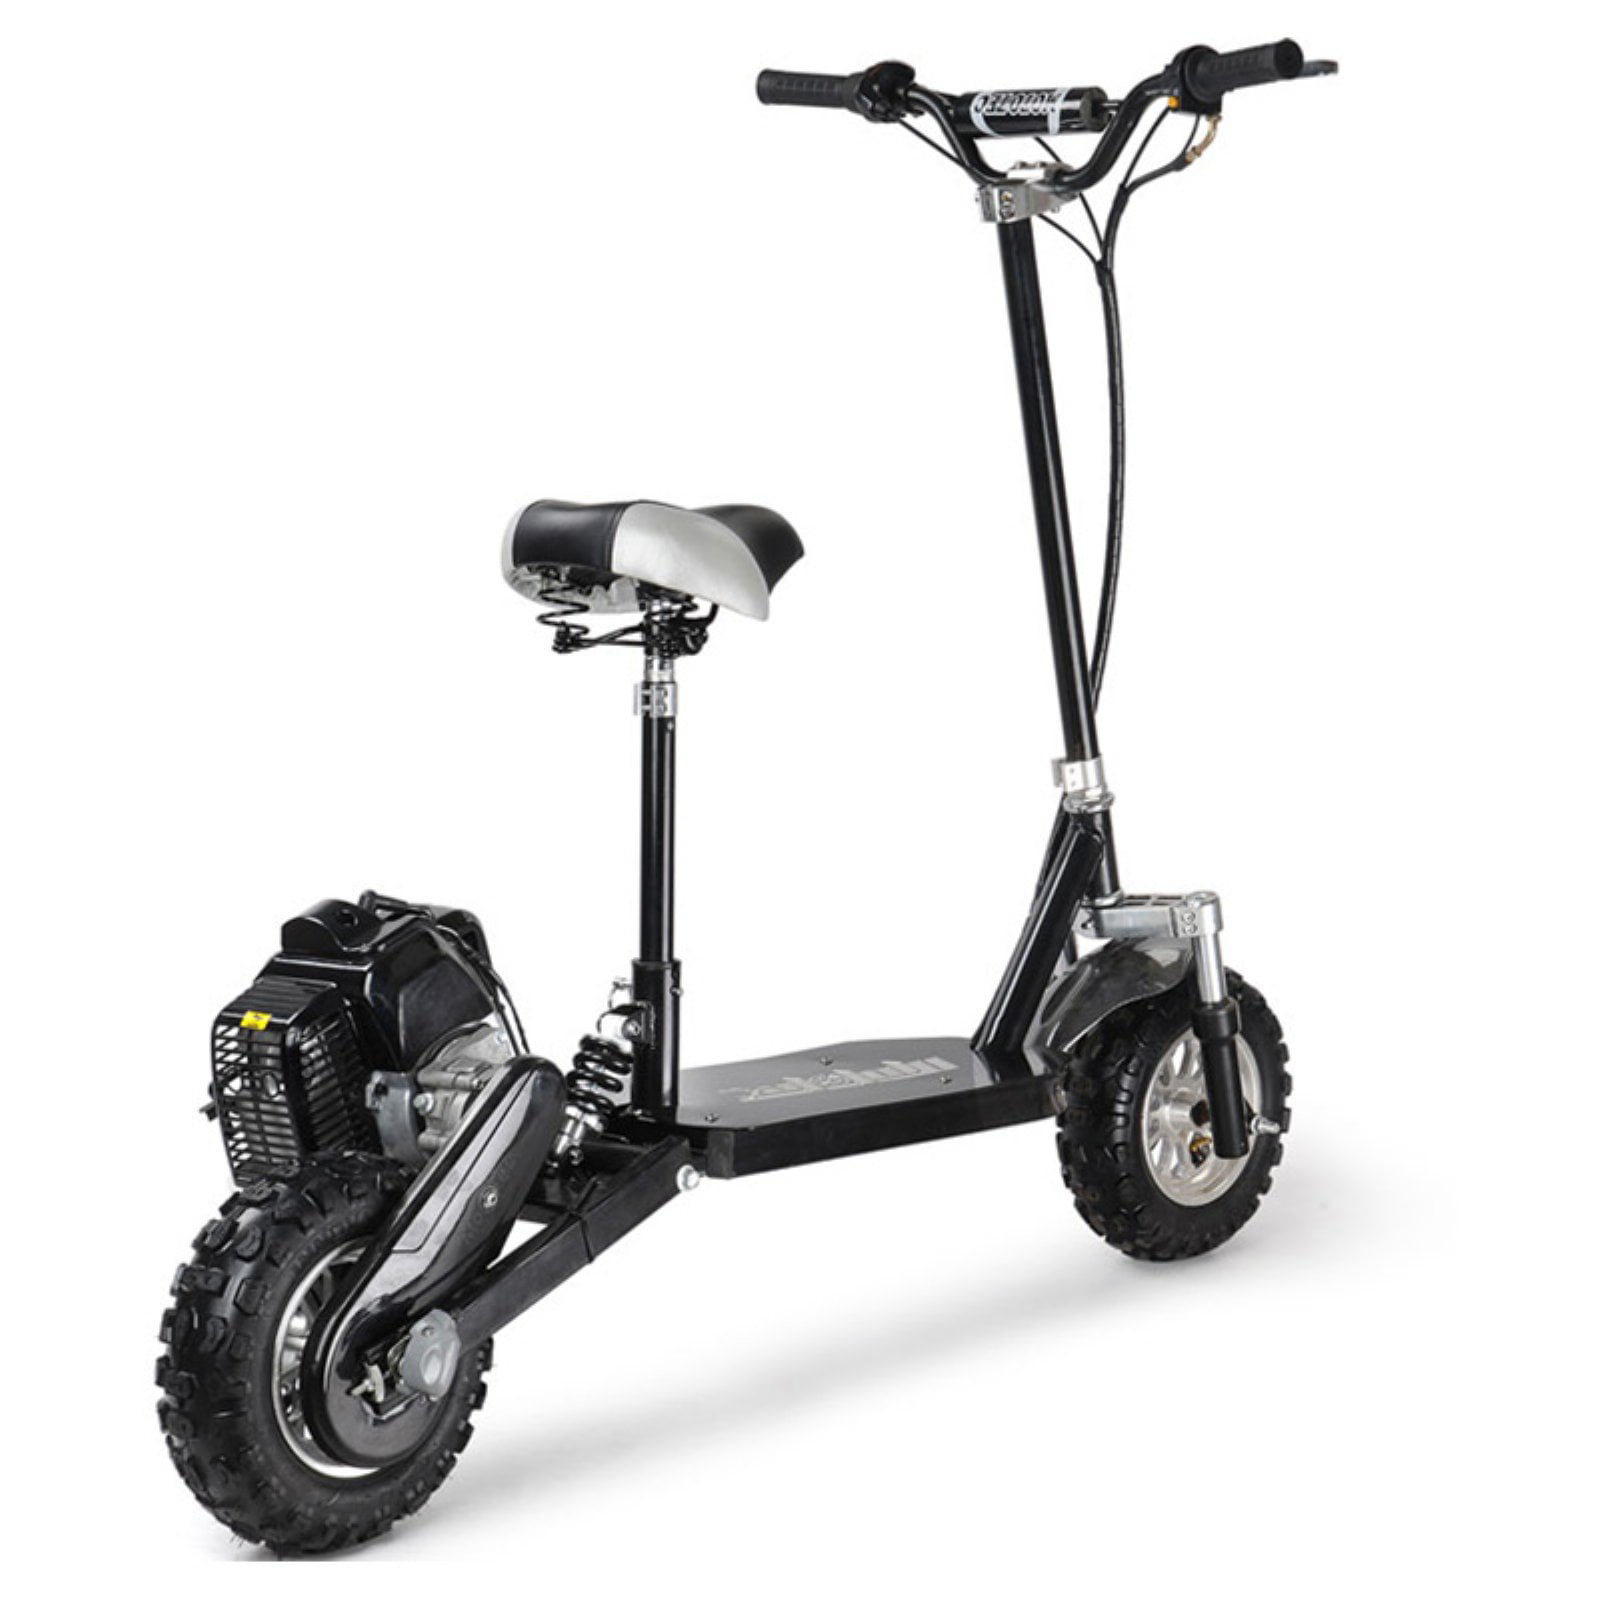 3-Speed 49cc Gas Scooter -